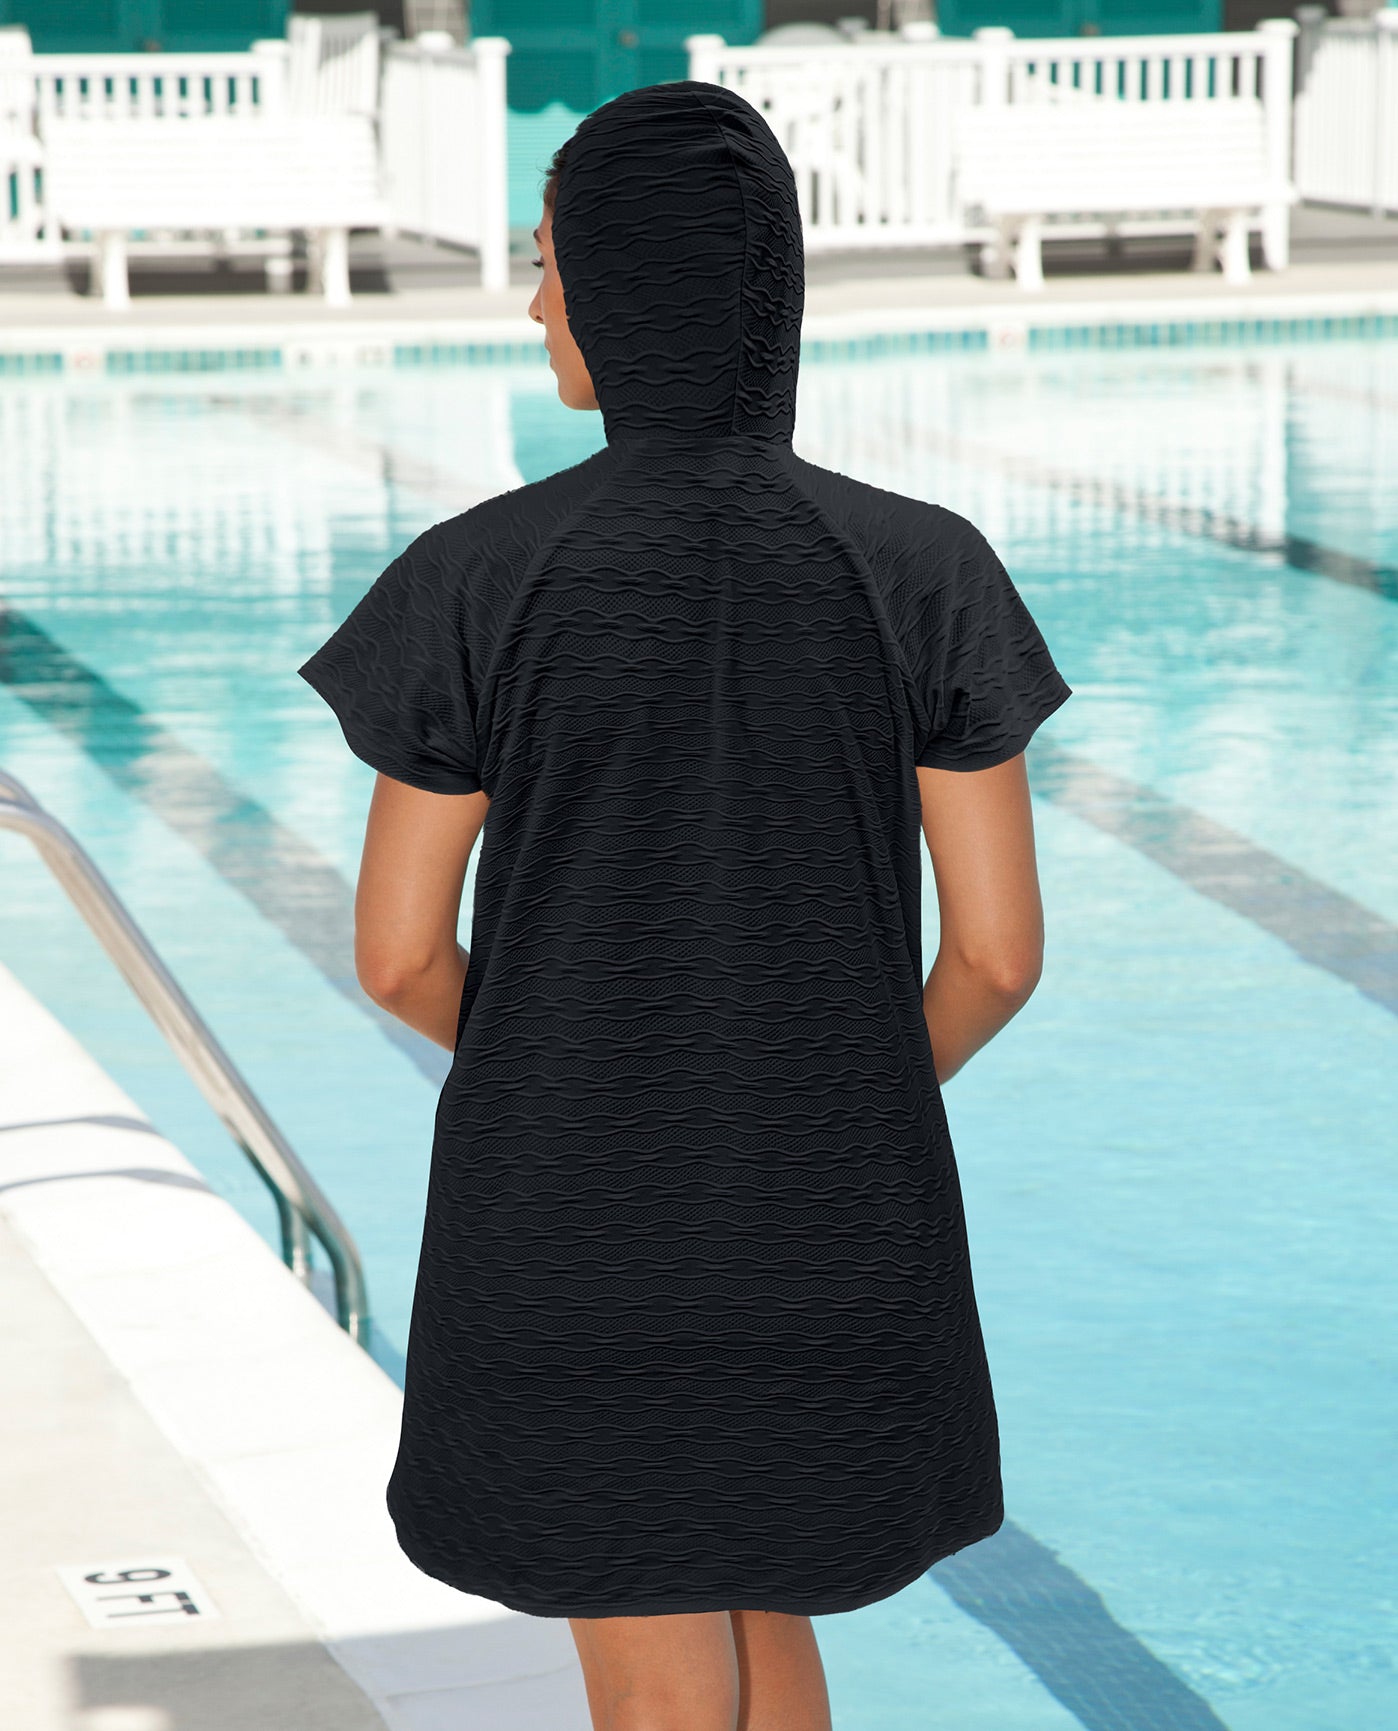 HOOD UP BACK VIEW OF AQUAMORE SOLID TEXTURED ZIPPER HOODIE COVER UP TUNIC | 017 AQM TEXTURED BLACK